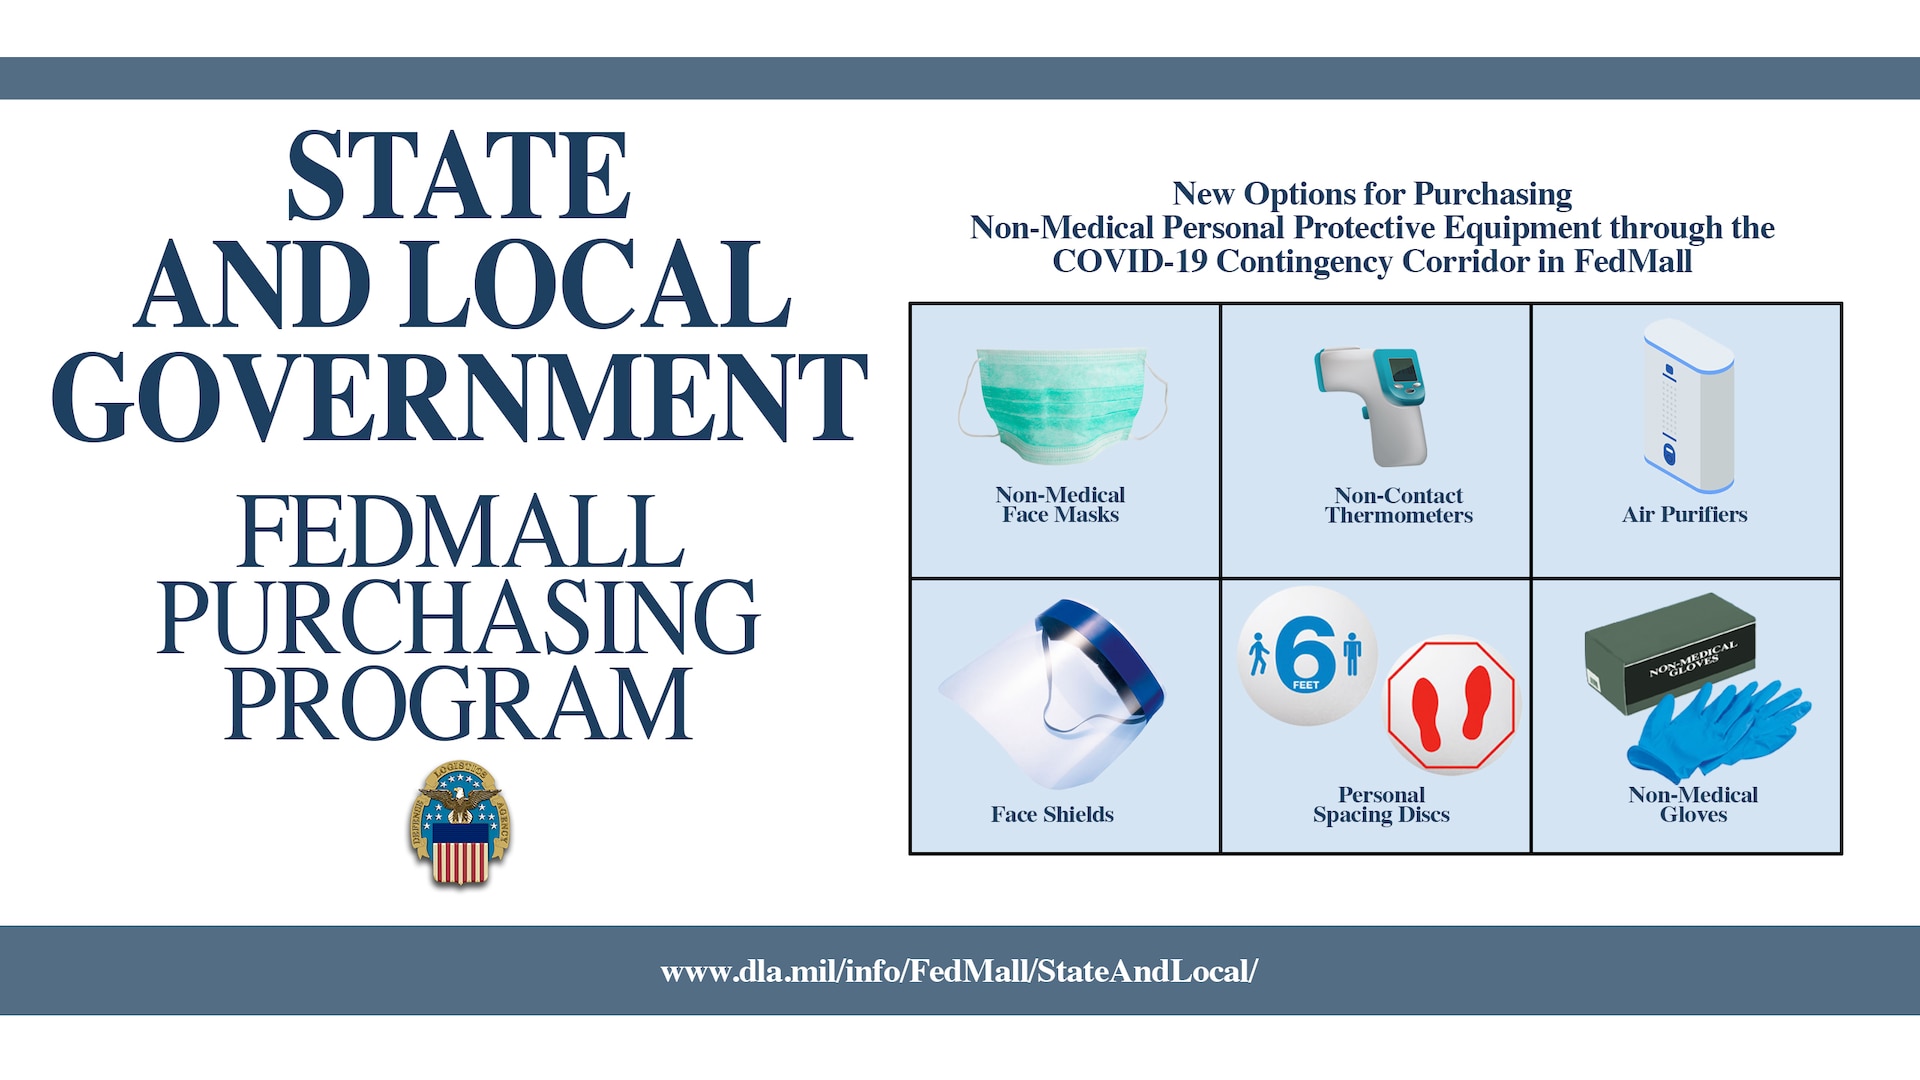 Examples of personal protective equipment like face masks and non-contact thermometers are accompanied by text saying "State and Local Government FedMall Purchasing Program"